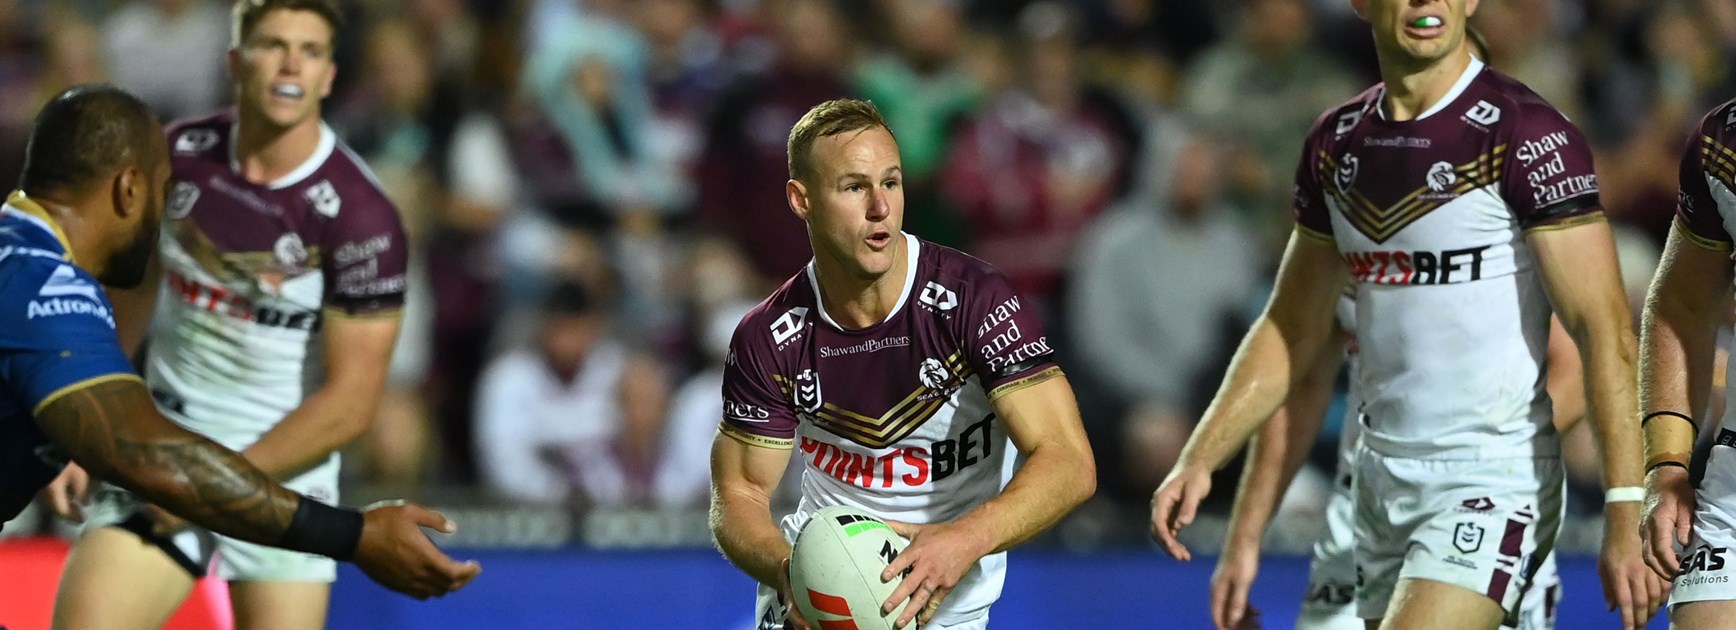 Four Sea Eagles pick up Rd 8 Dally M points